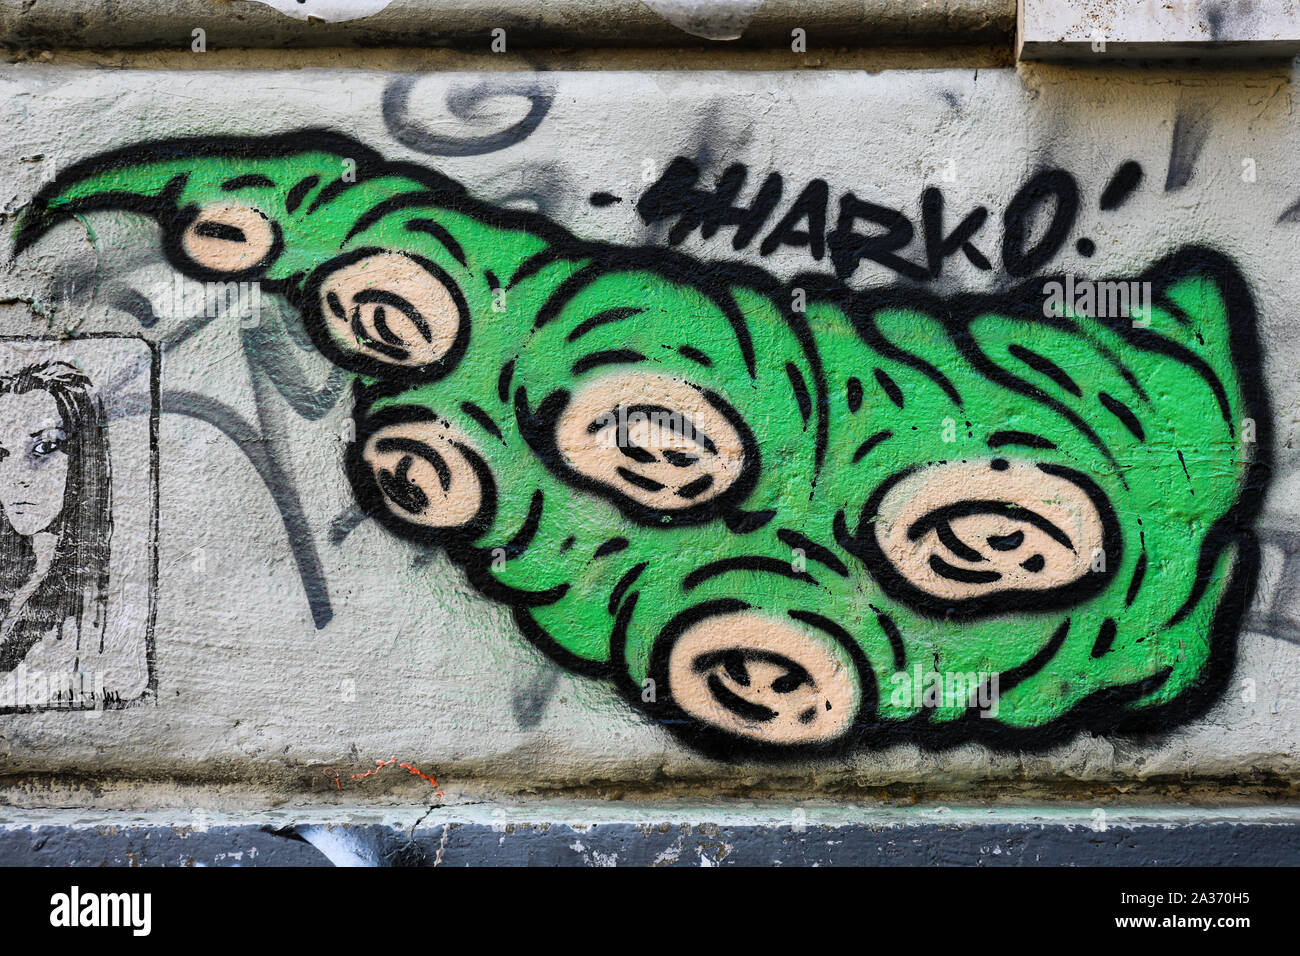 Green tentacle graffiti by Sharko on the wall in Trastevere district, Rome, Italy Stock Photo